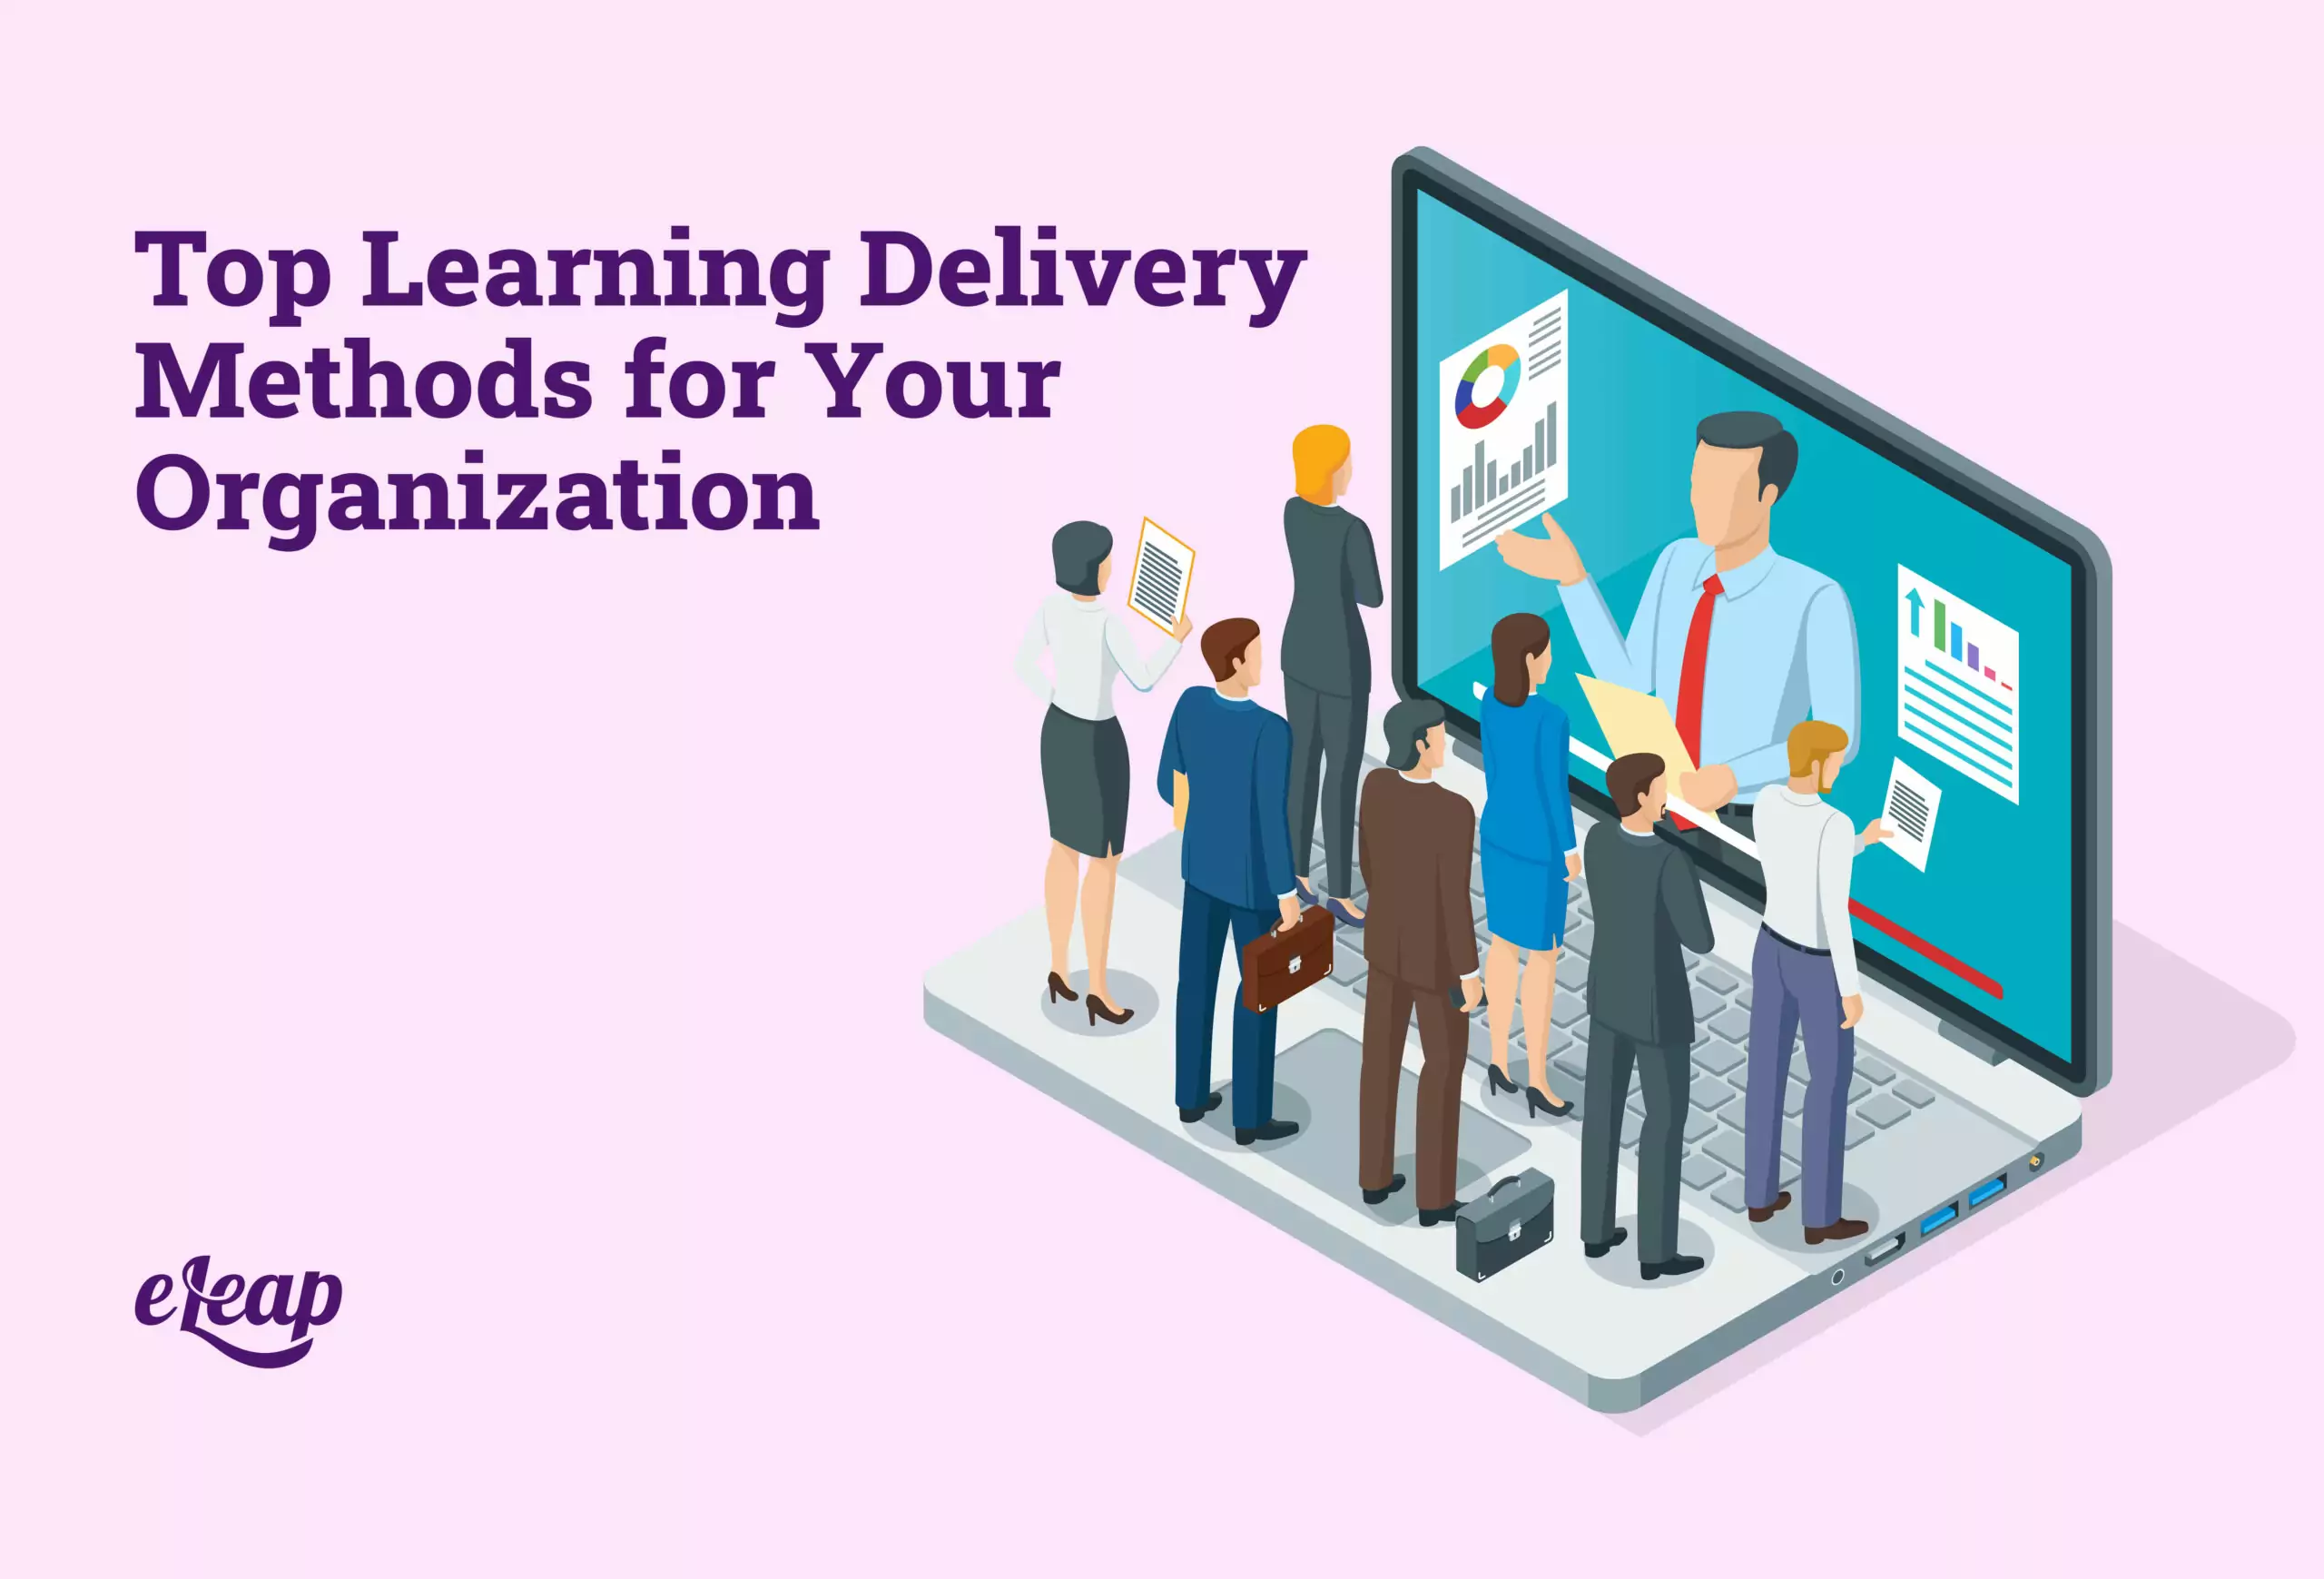 Top Learning Delivery Methods for Your Organization